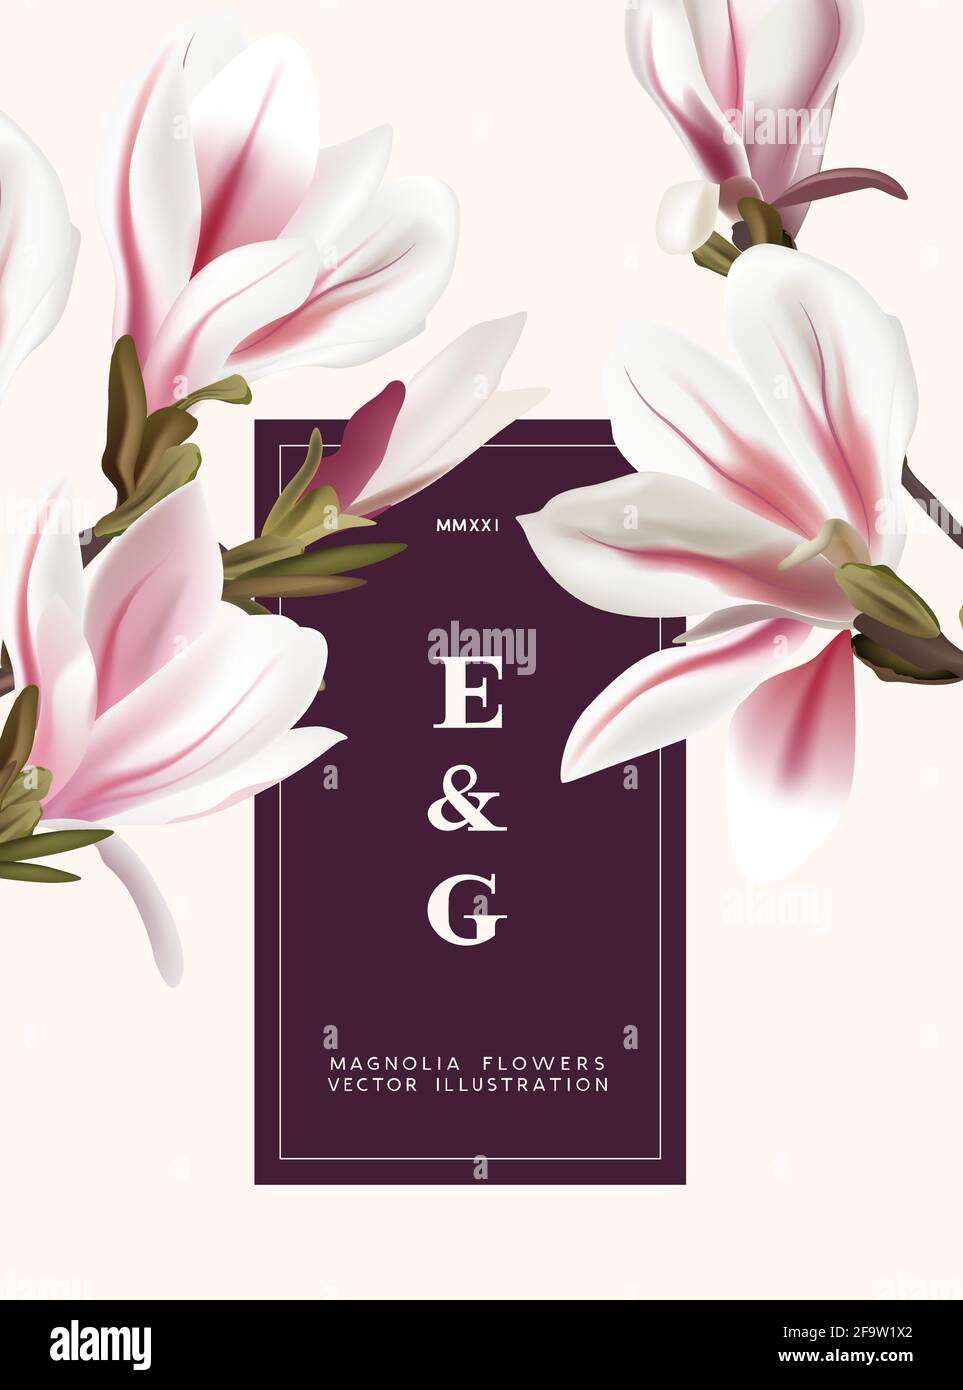 Natural magnolia realistic flowers contemporary invitation layout designs. Event marketing floral pattern background vector illustration. Stock Vector